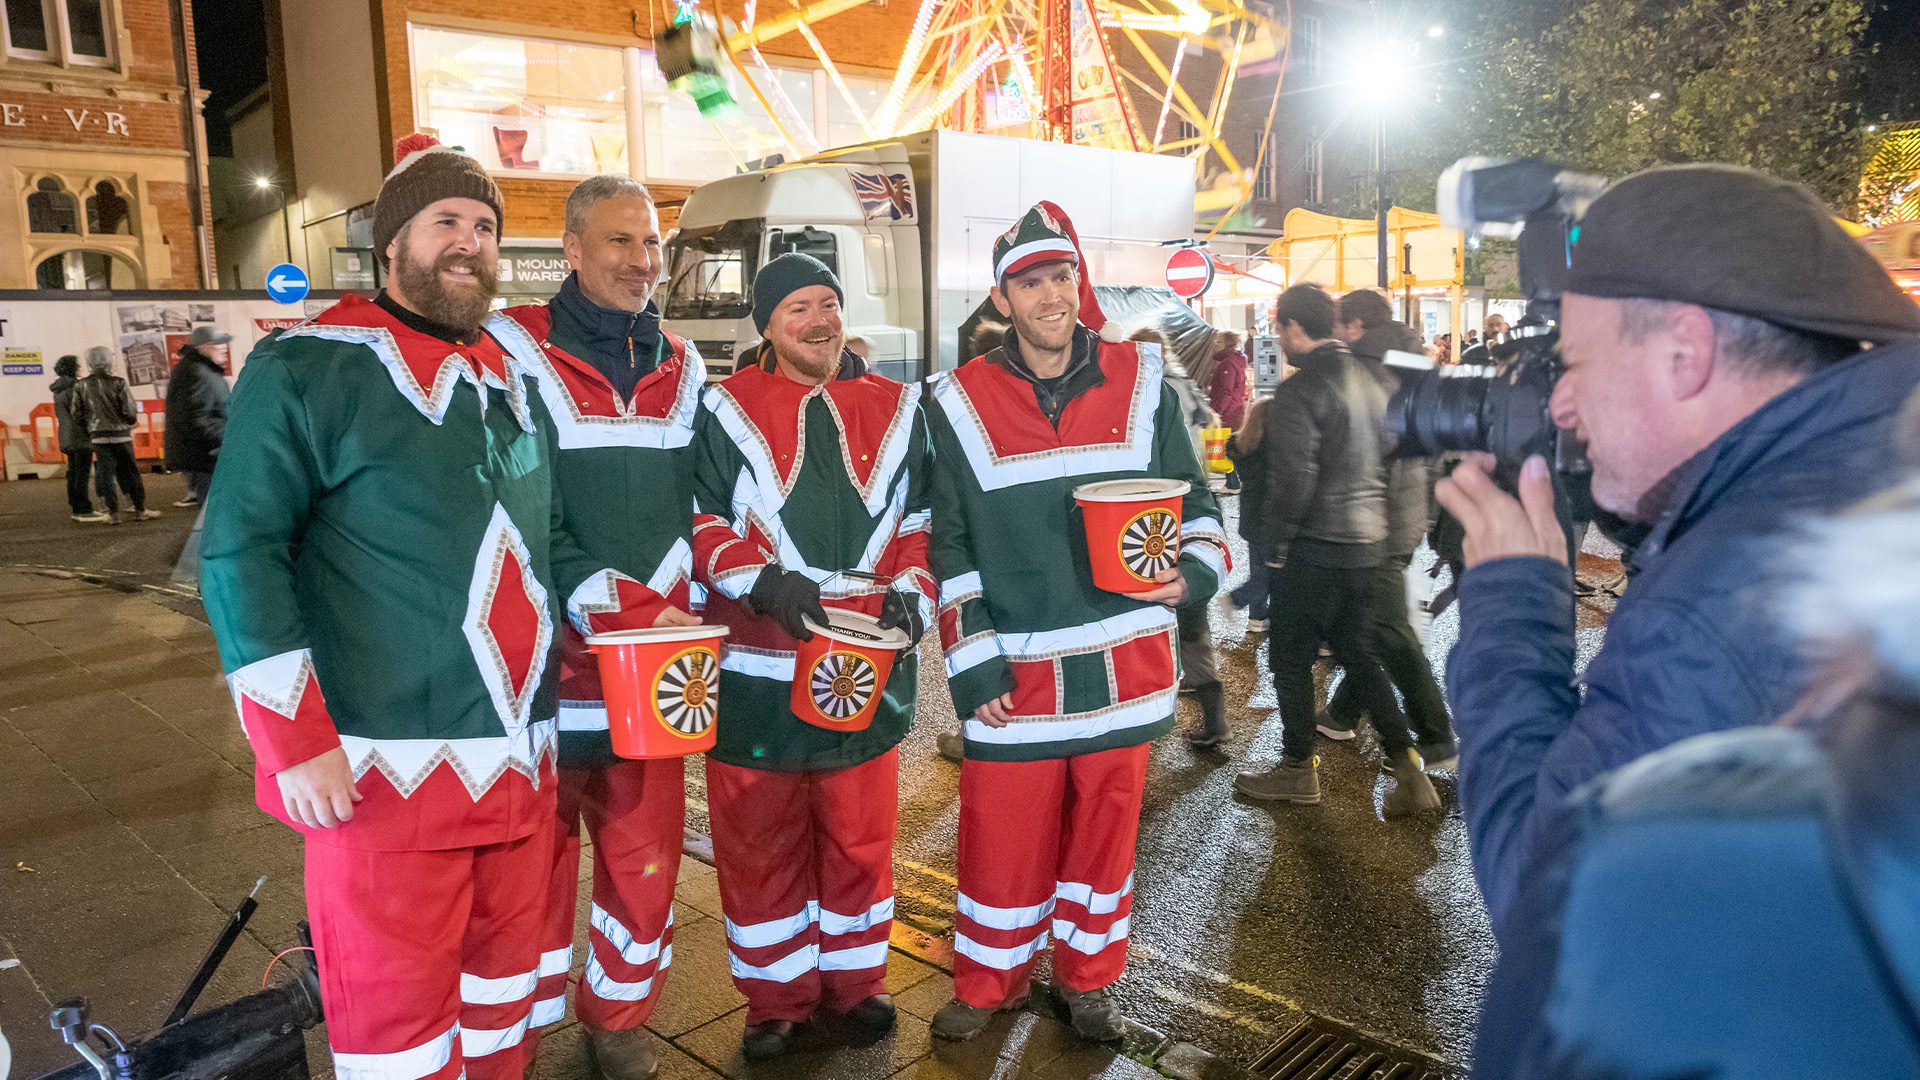 A group of male volunteers are dressed up as elves